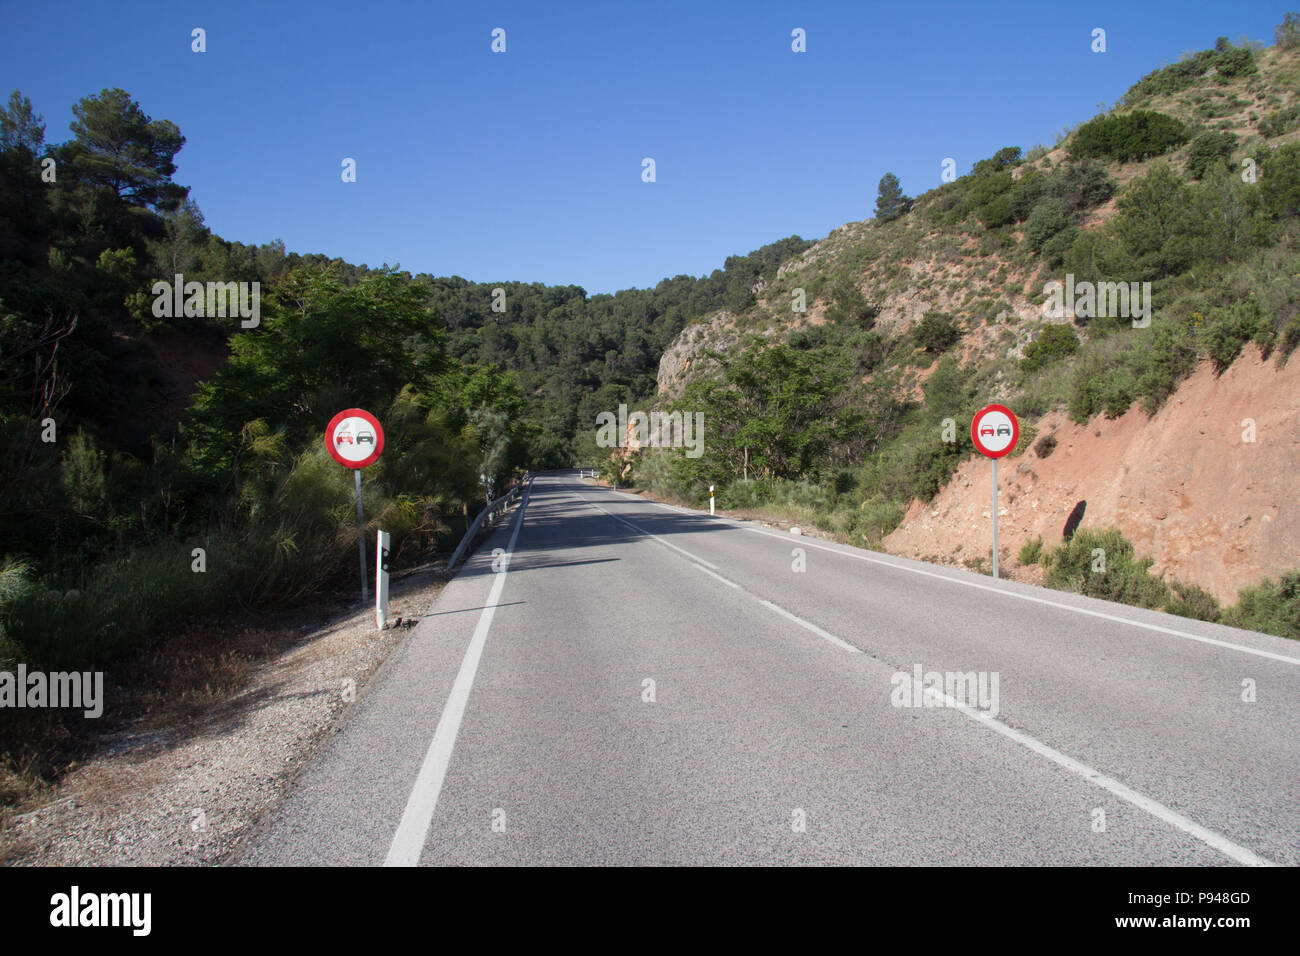 Empty road through the Parque Naturel sierra Magina, Jaen province, Spain with no overtaking signs Stock Photo